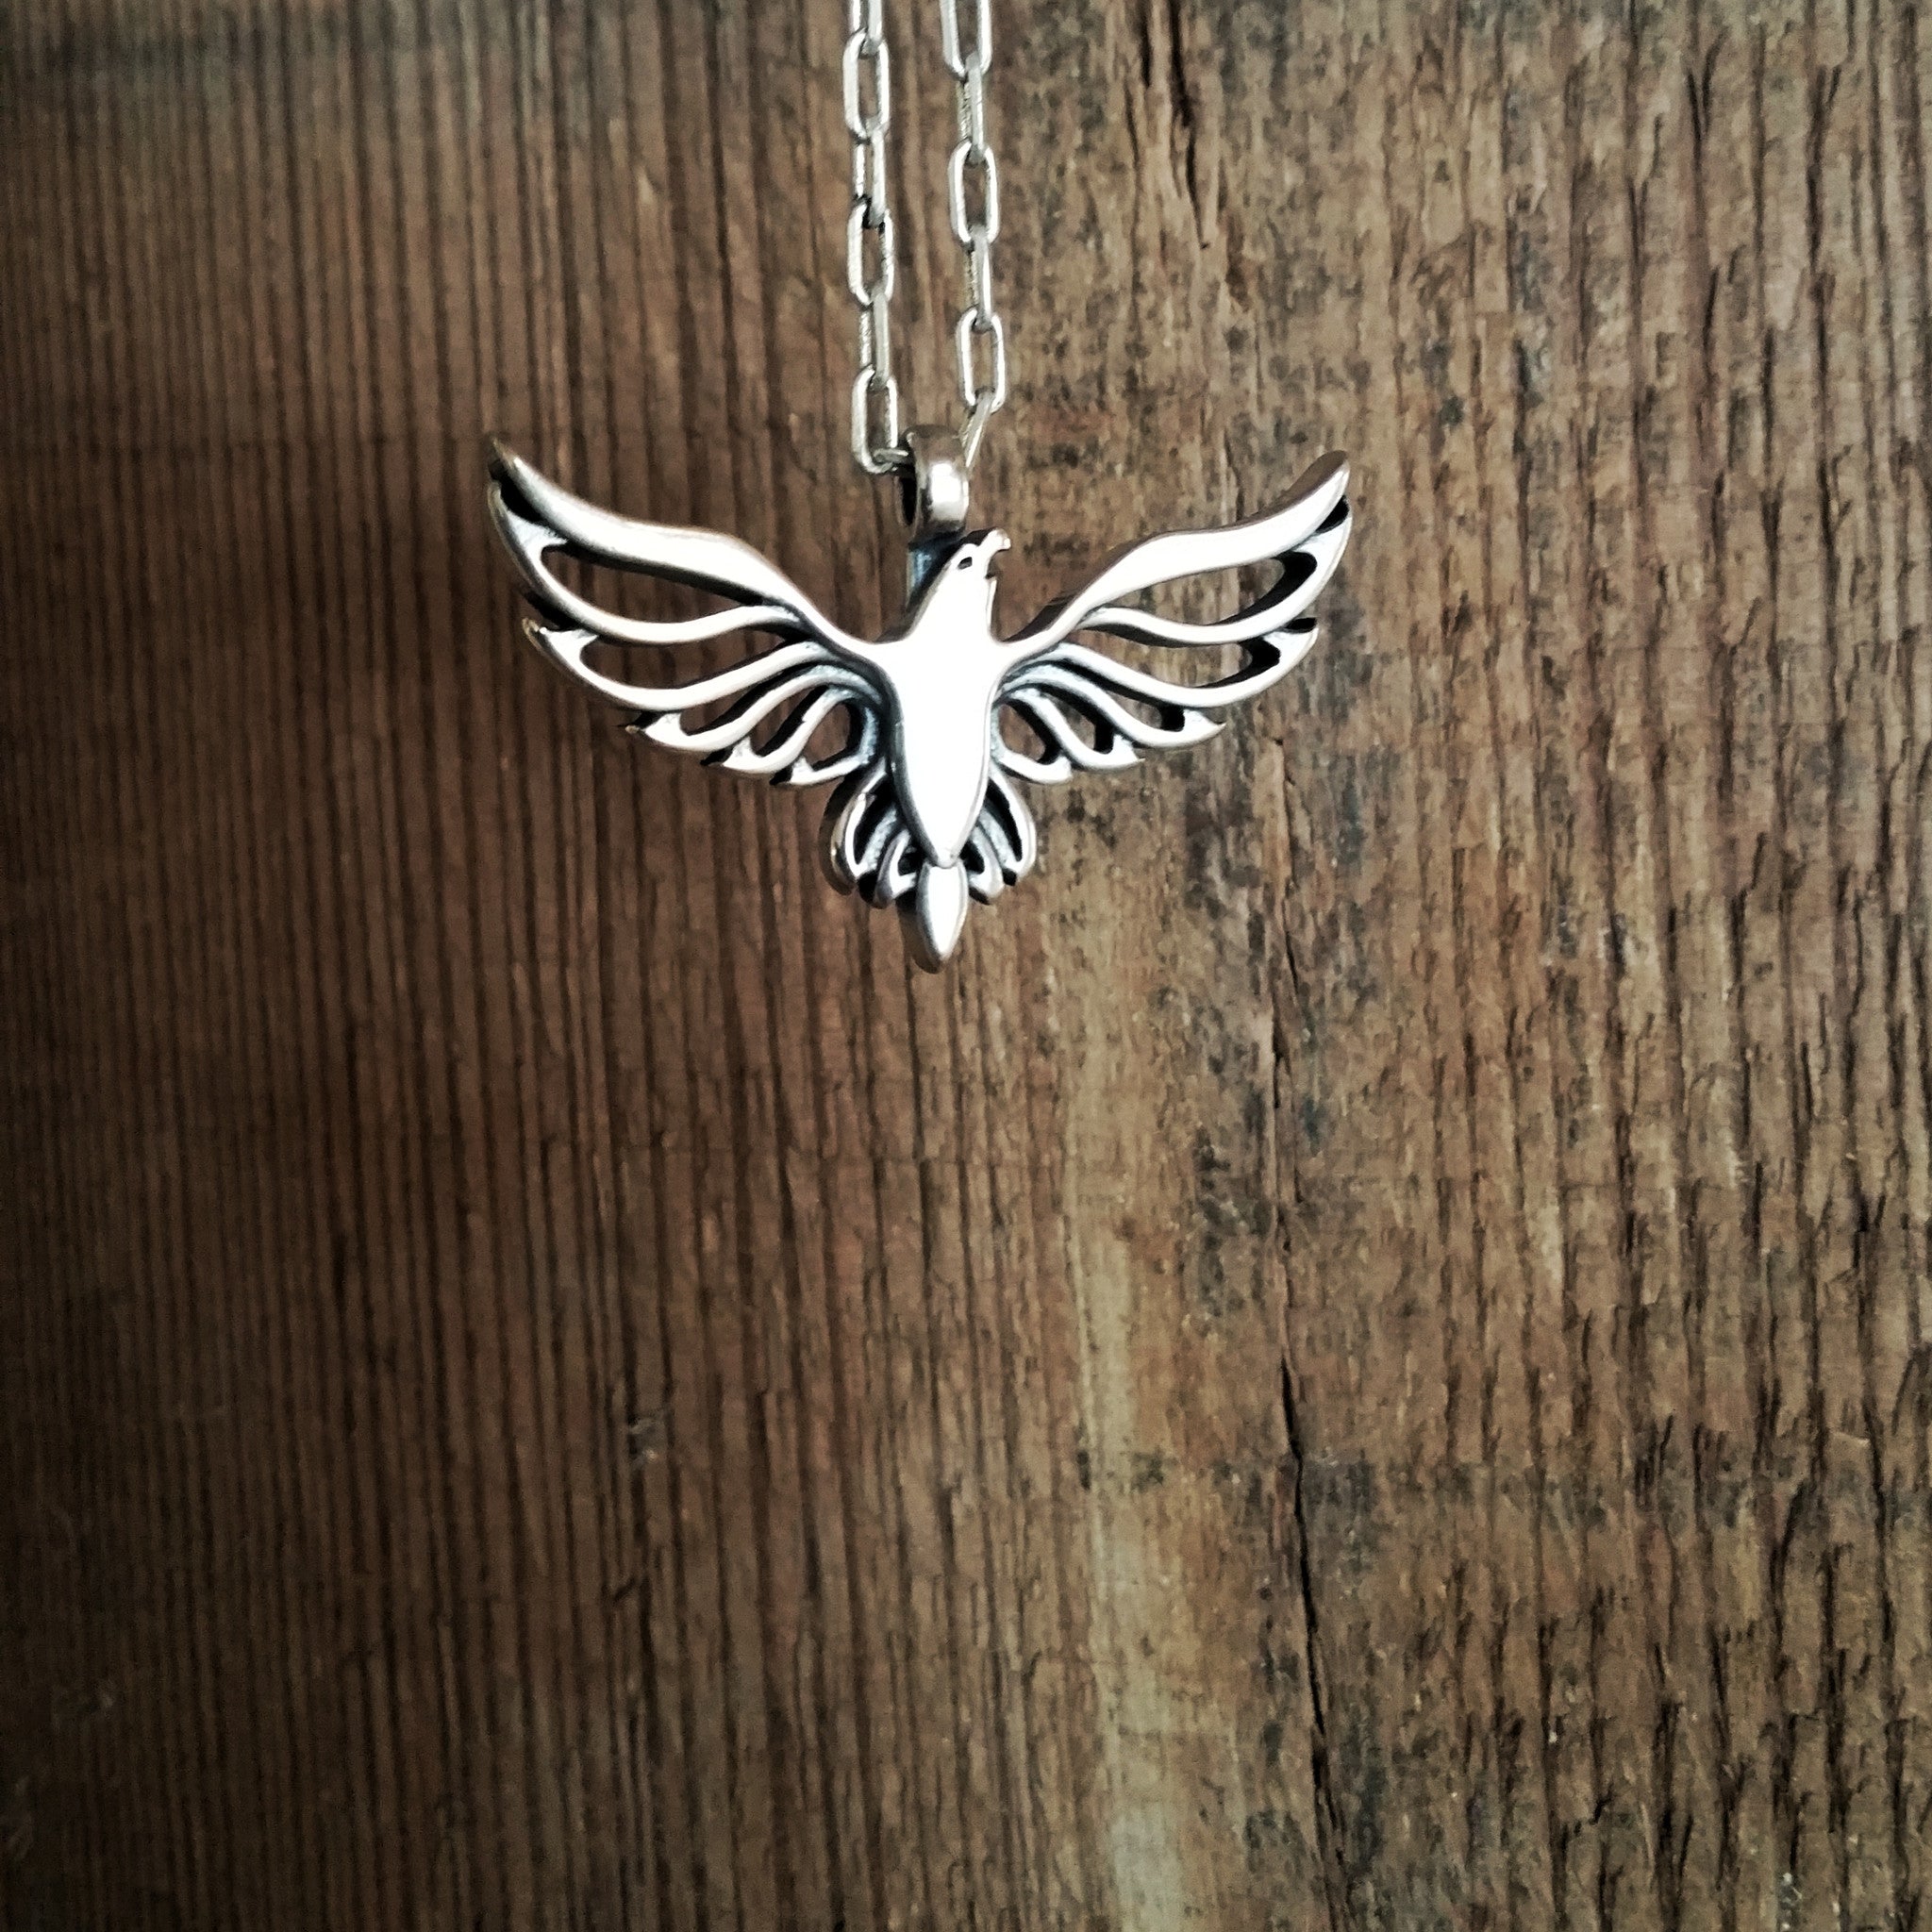 FREEDOM Soaring Eagle Necklace - Sterling Silver HONOR EMBLEM Jewelry